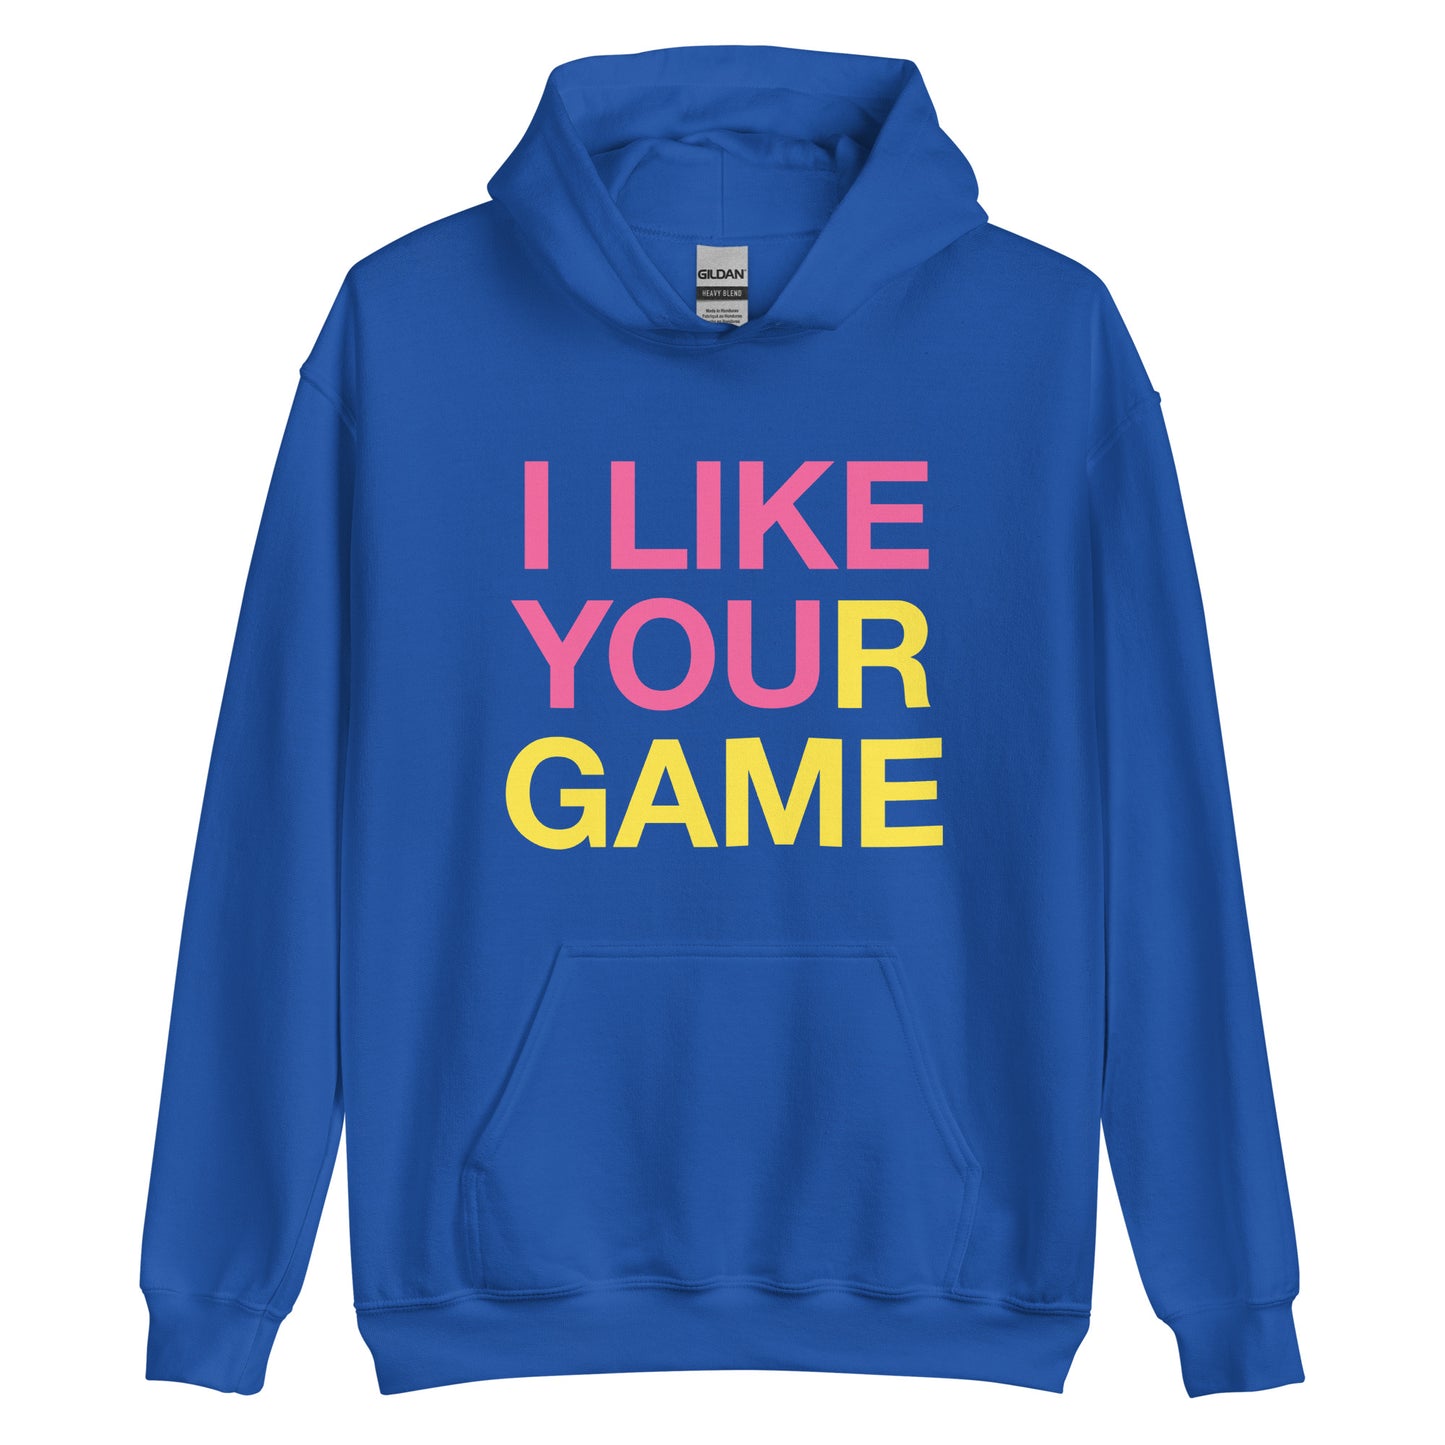 I LIKE YOUR GAME Unisex Hoodie